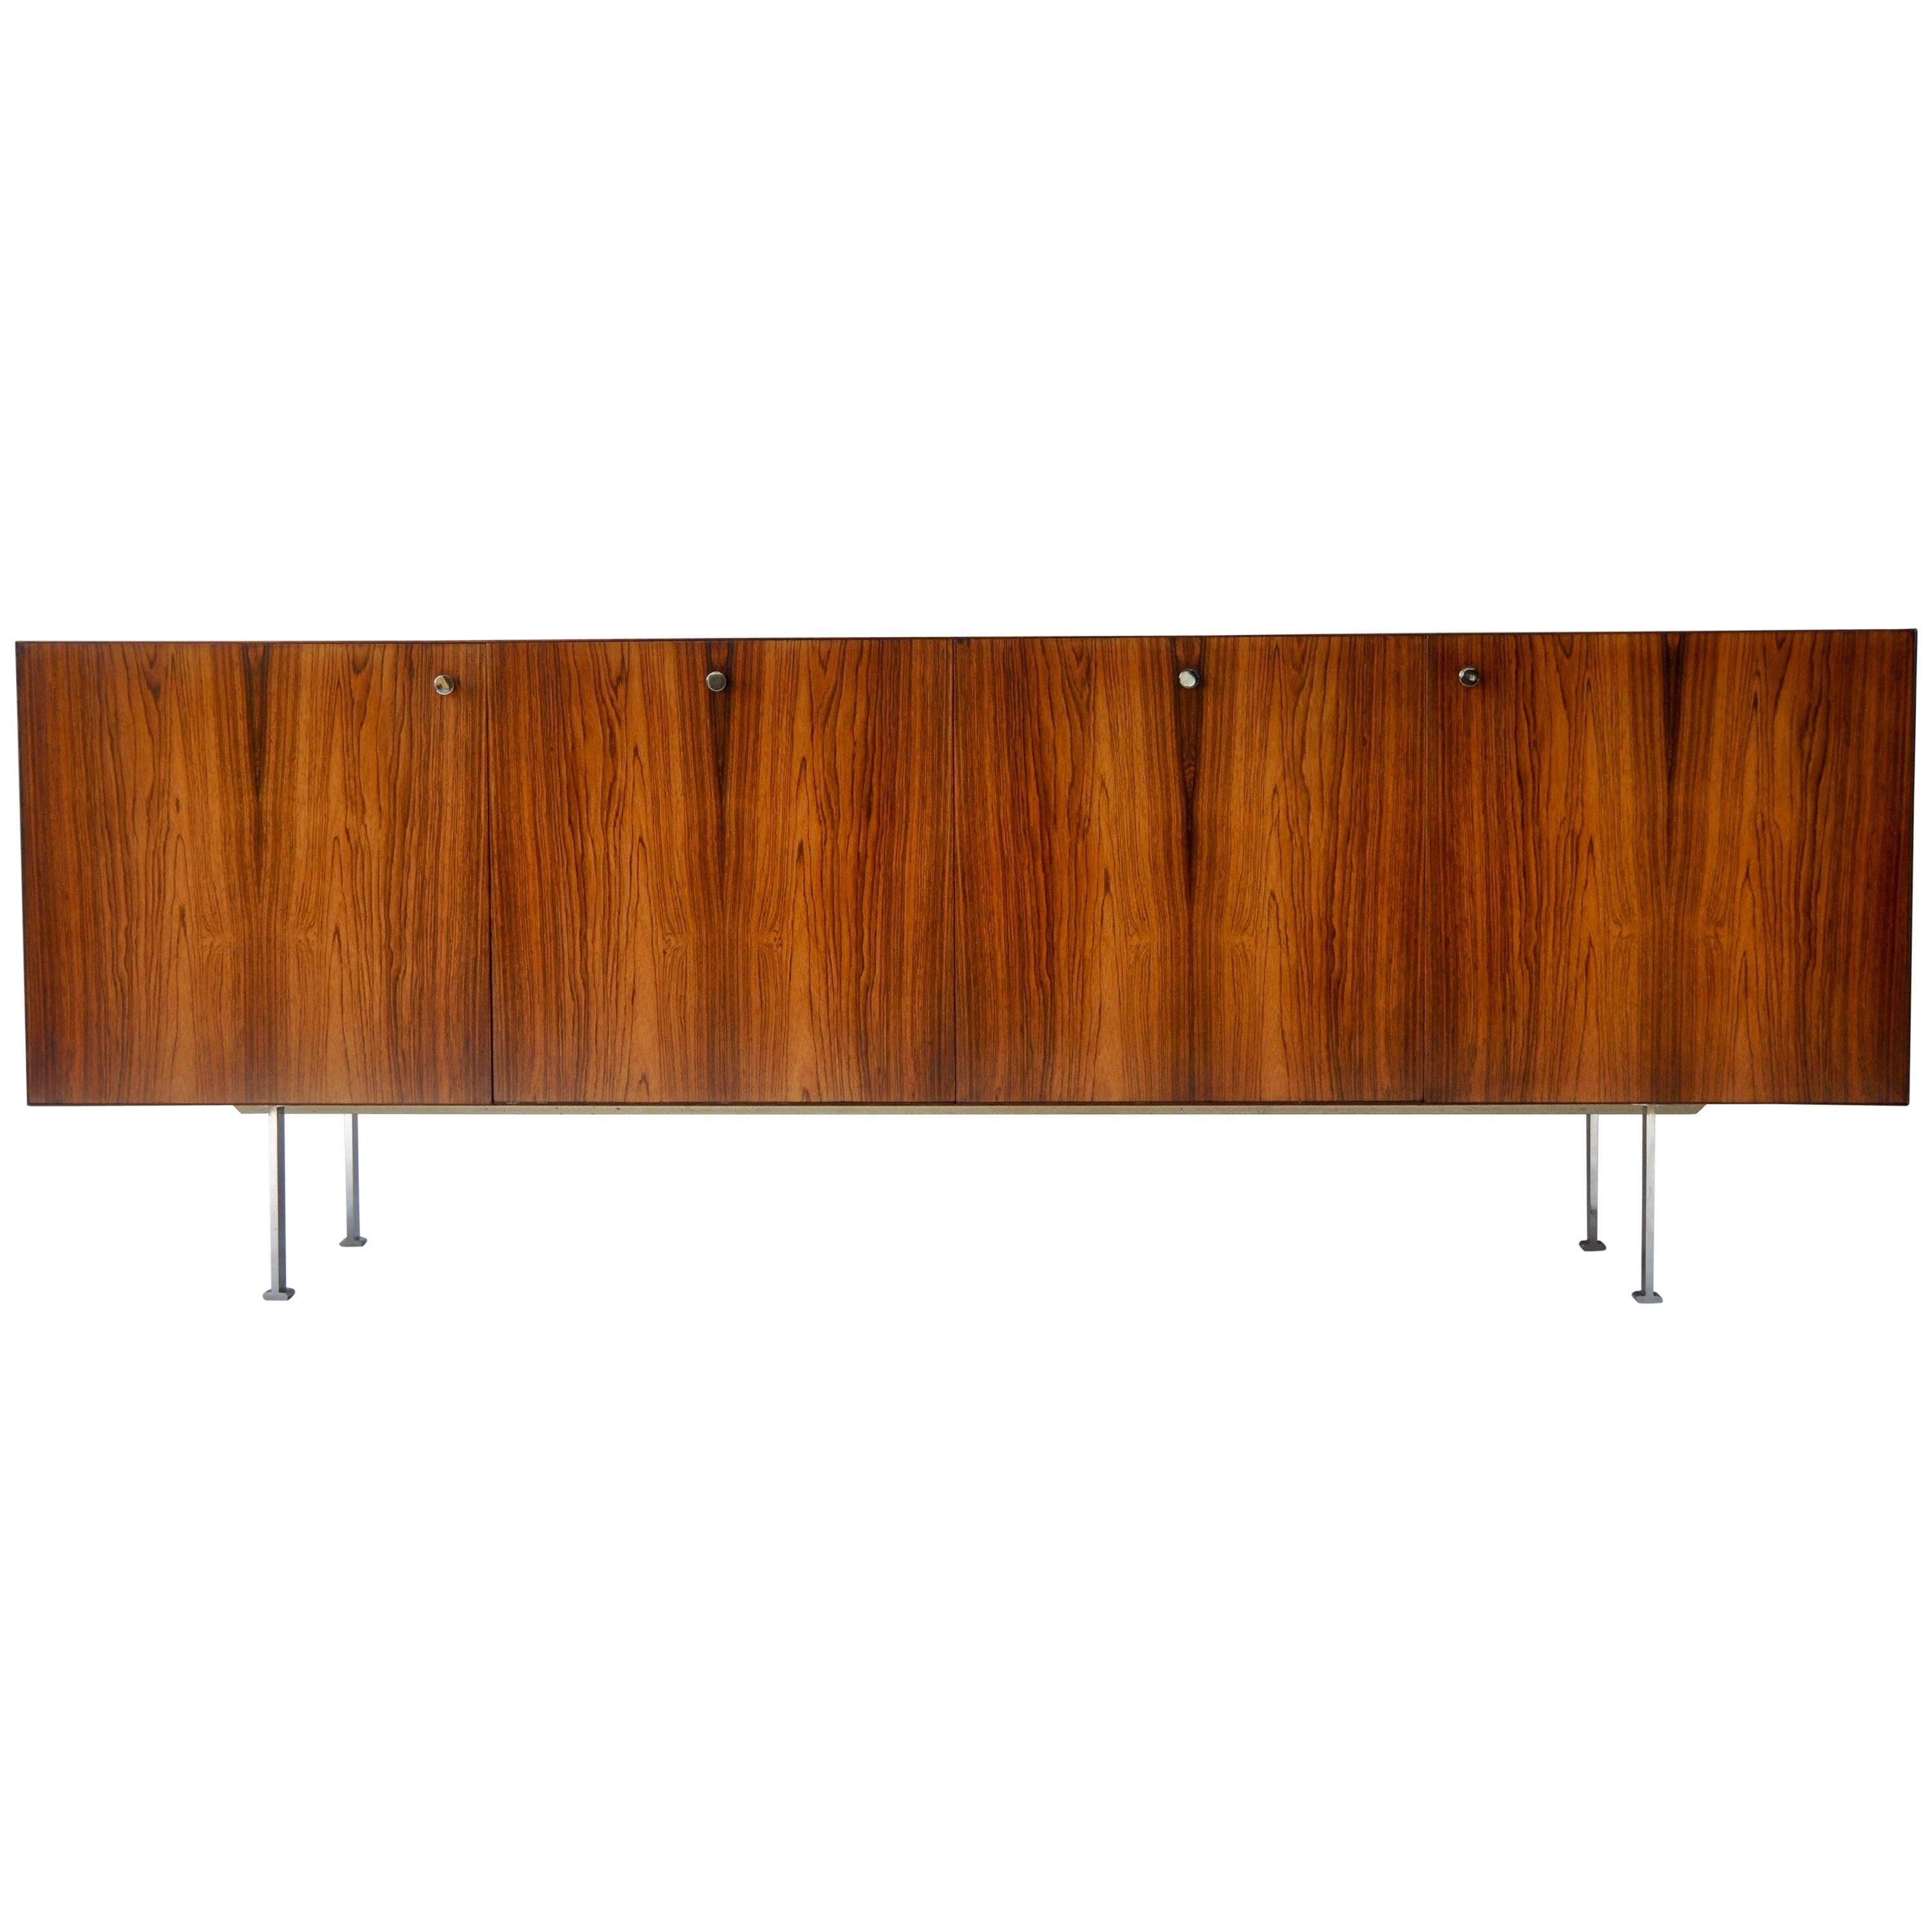 Rosewood Credenza by Poul Norreklit